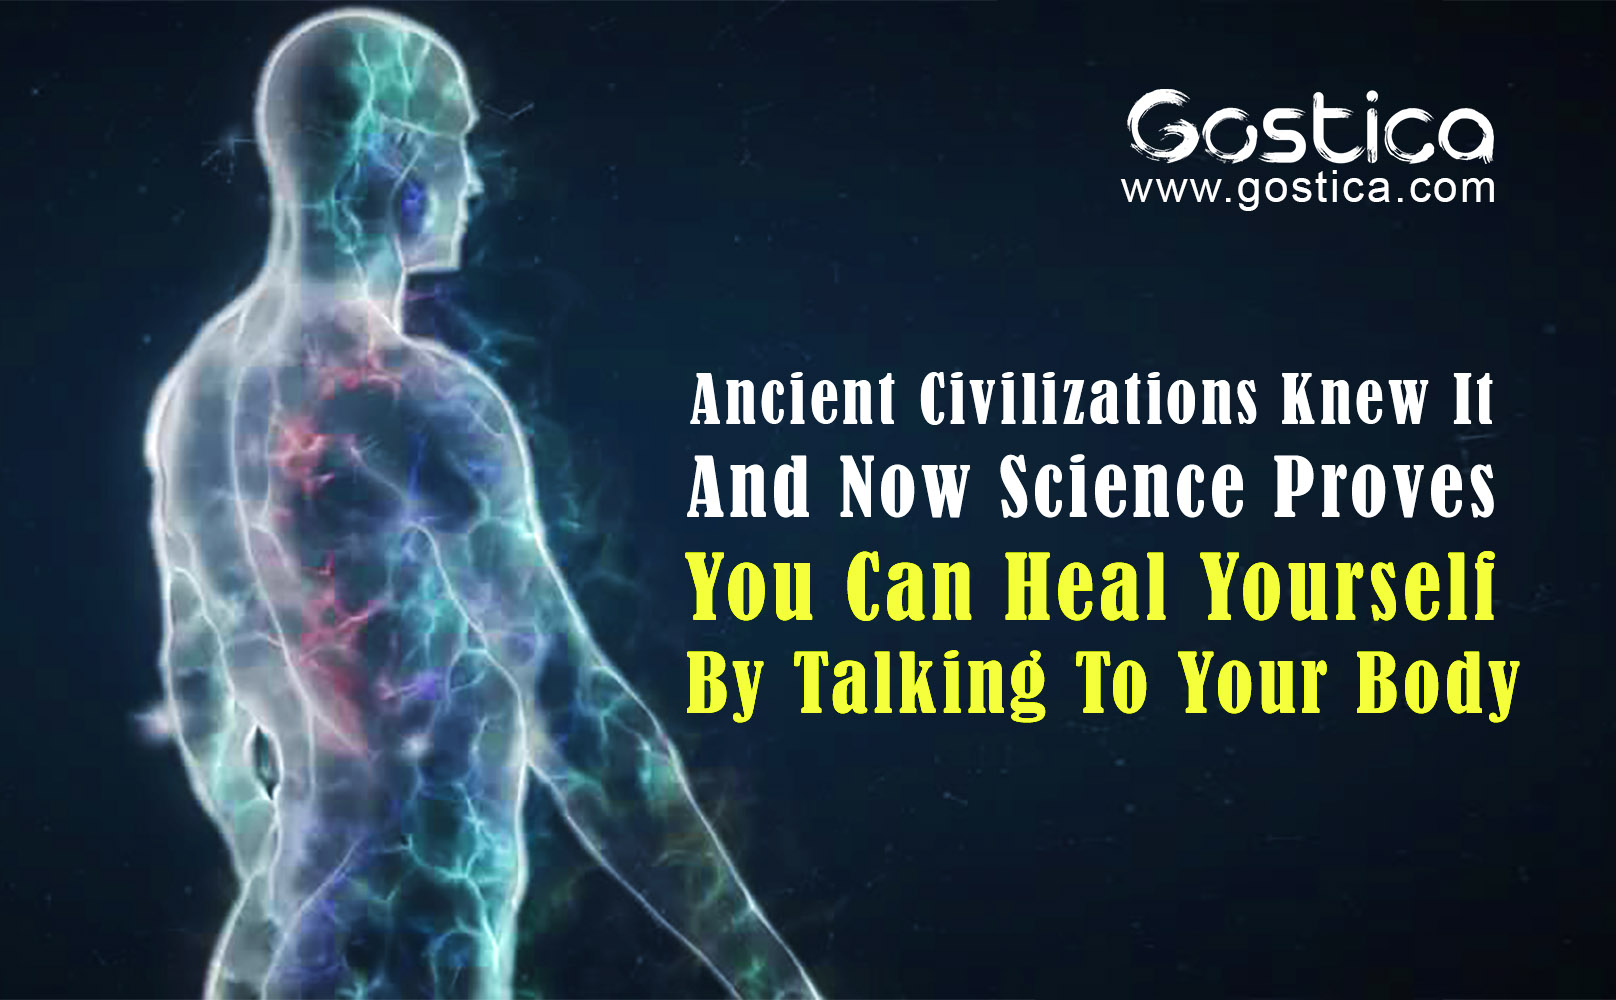 Ancient-Civilizations-Knew-It-And-Now-Science-Proves-You-Can-Heal-Yourself-By-Talking-To-Your-Body.jpg